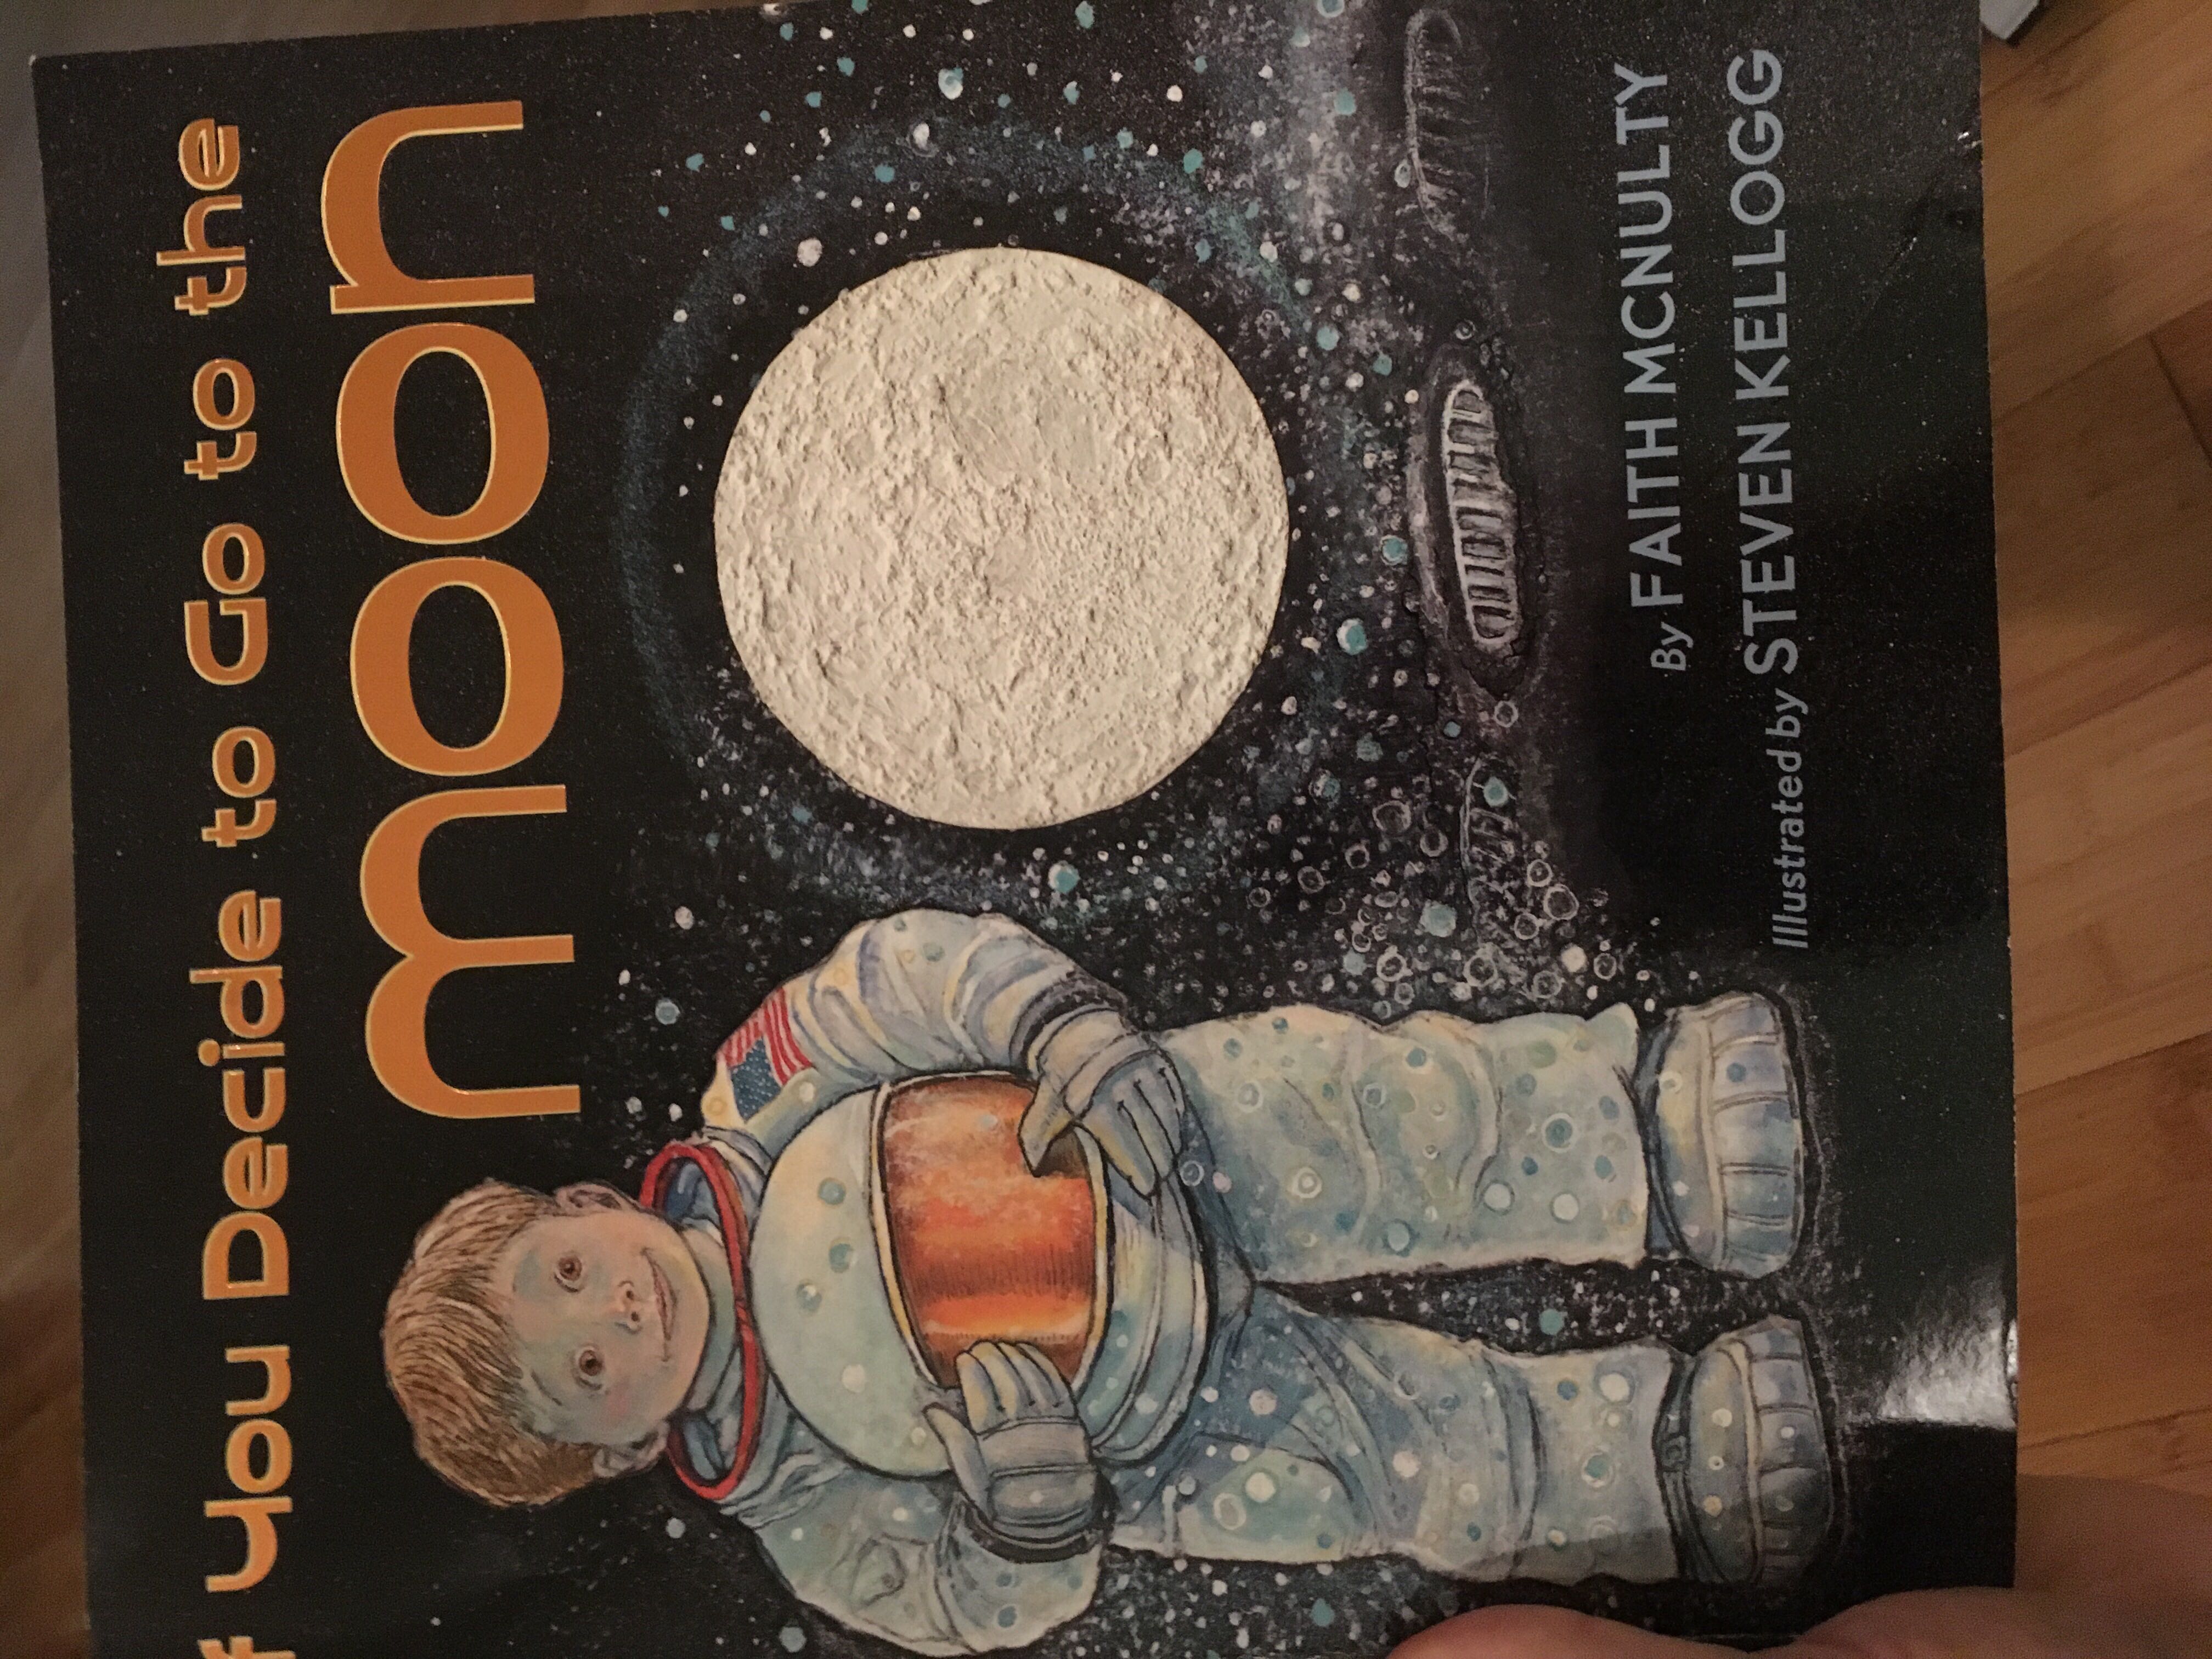 If You Decide To Go To The Moon - Faith McNulty (Scholastic, Inc. - Paperback) book collectible [Barcode 9780545000857] - Main Image 3